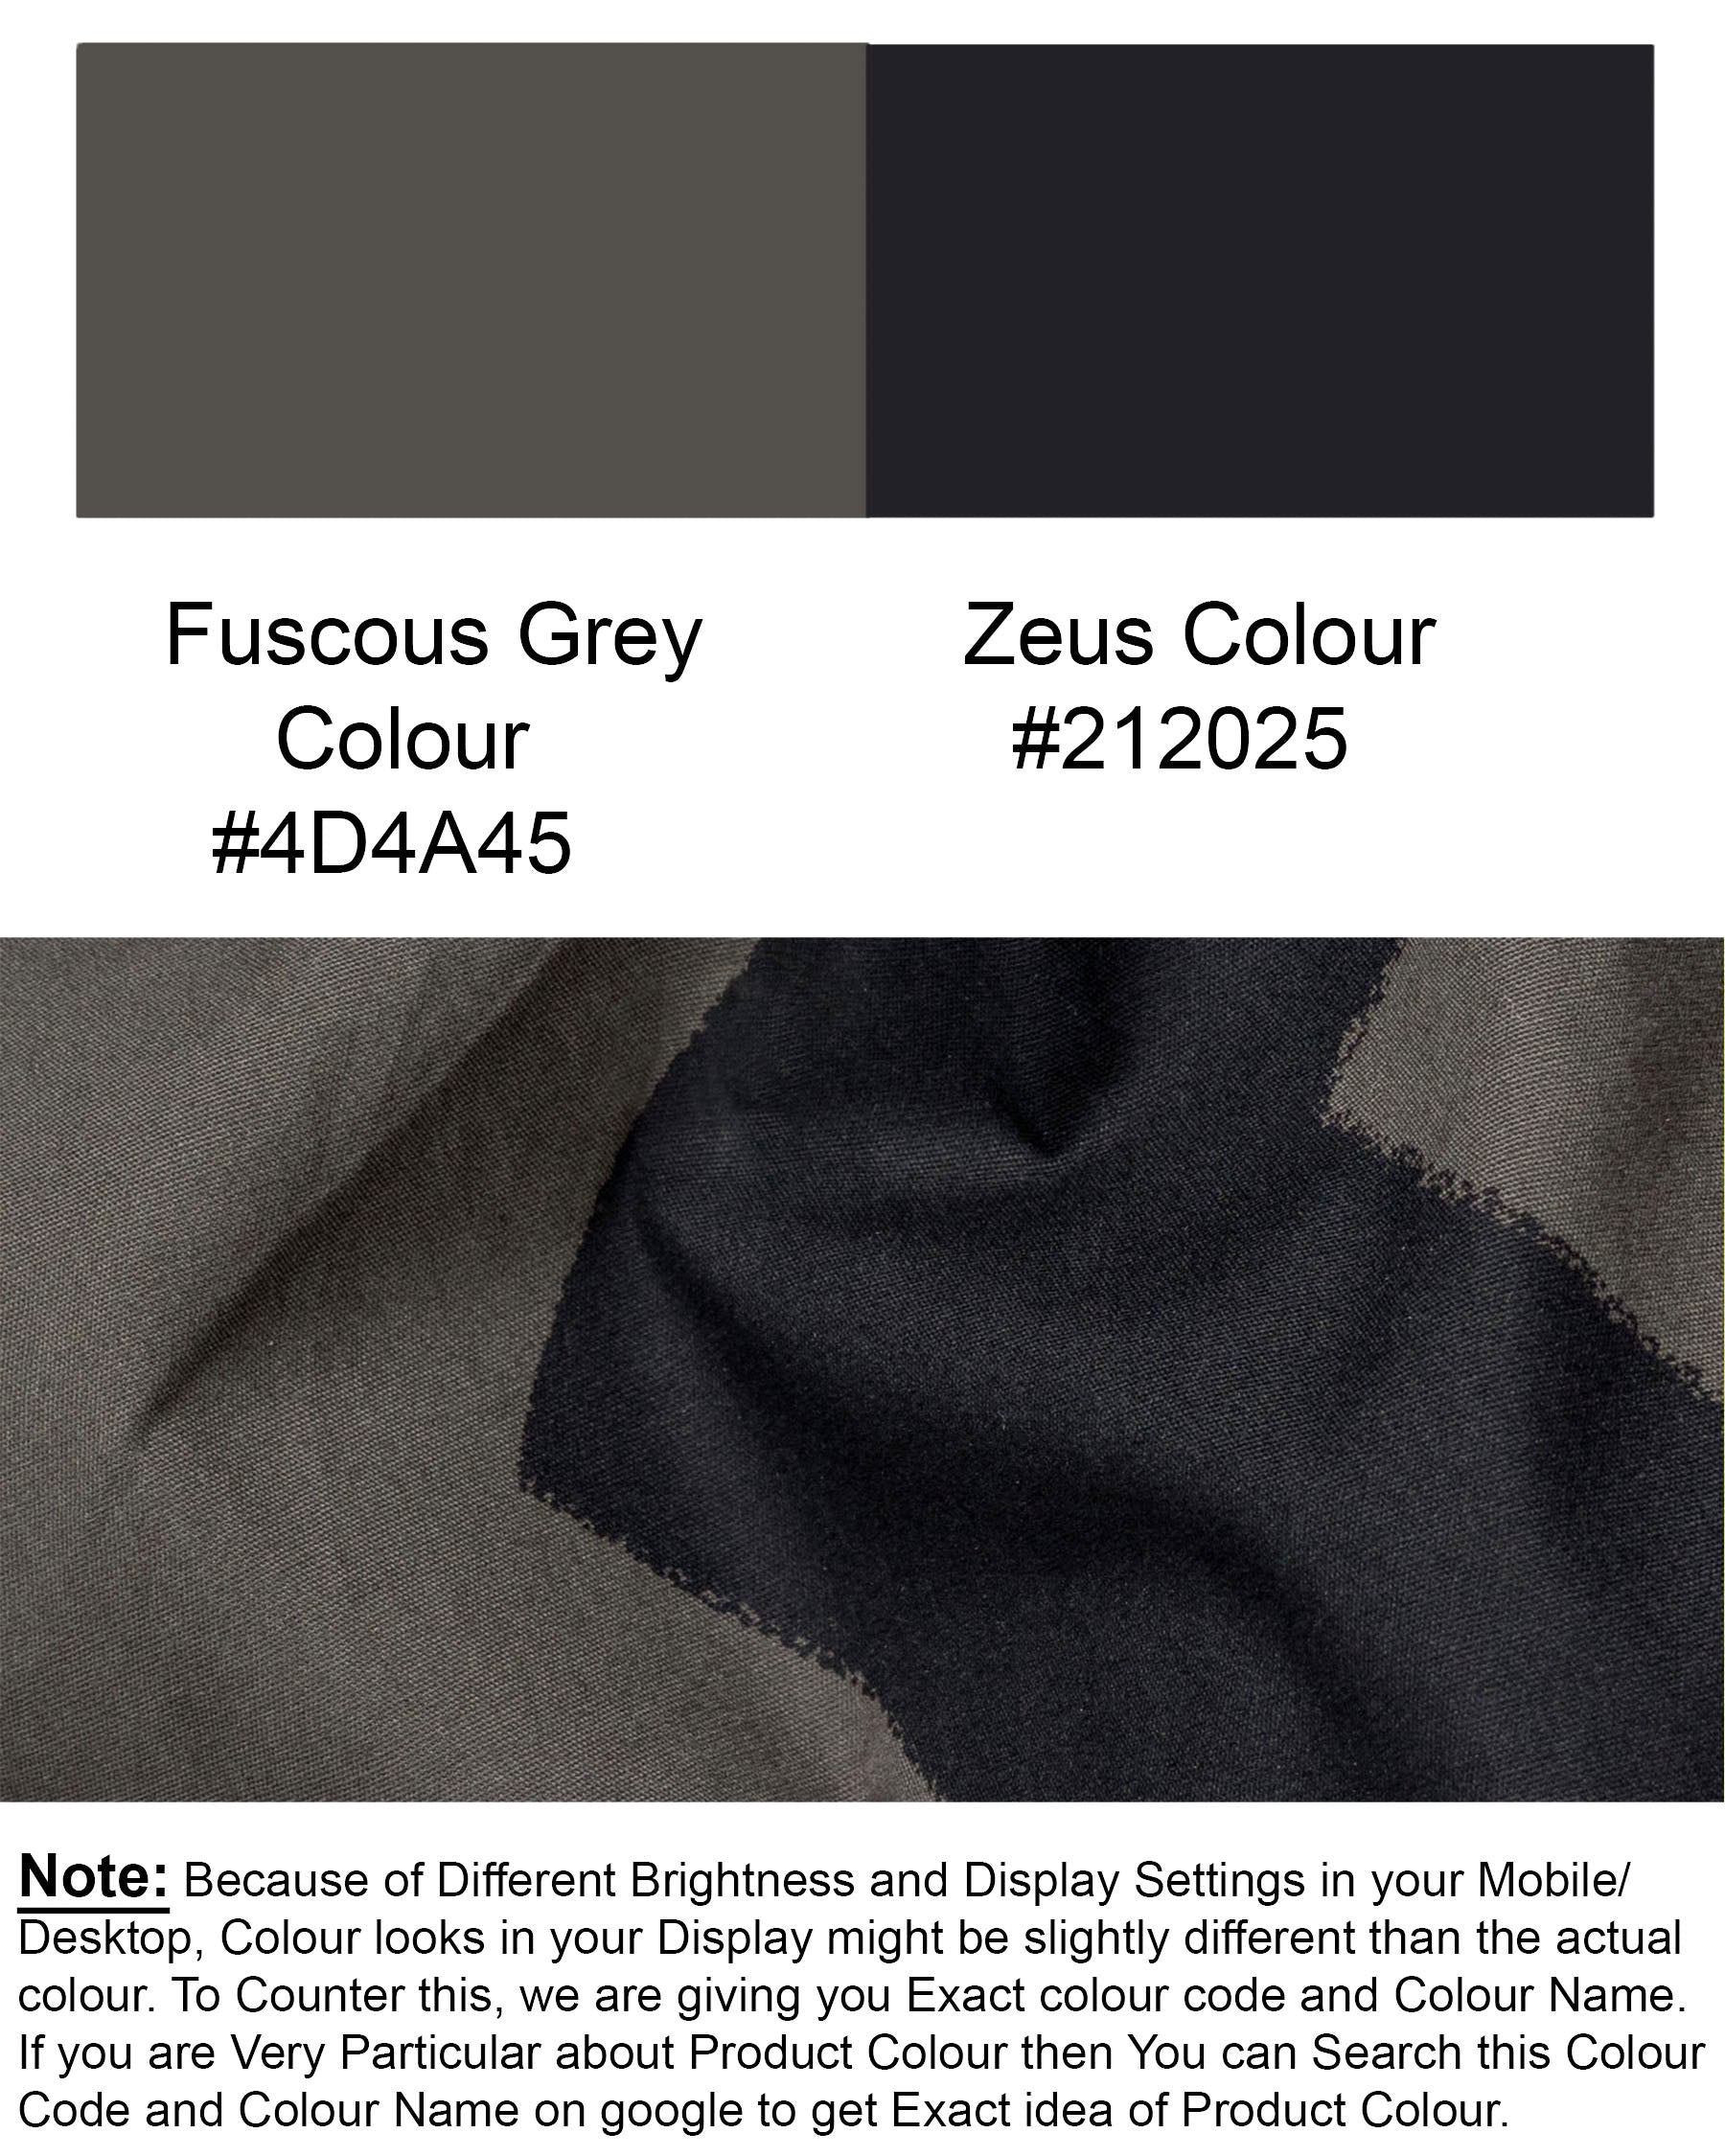 Fuscous Grey with Zeus Black abstract Patterned Premium Cotton Shirt 6861-M-38,6861-M-38,6861-M-39,6861-M-39,6861-M-40,6861-M-40,6861-M-42,6861-M-42,6861-M-44,6861-M-44,6861-M-46,6861-M-46,6861-M-48,6861-M-48,6861-M-50,6861-M-50,6861-M-52,6861-M-52